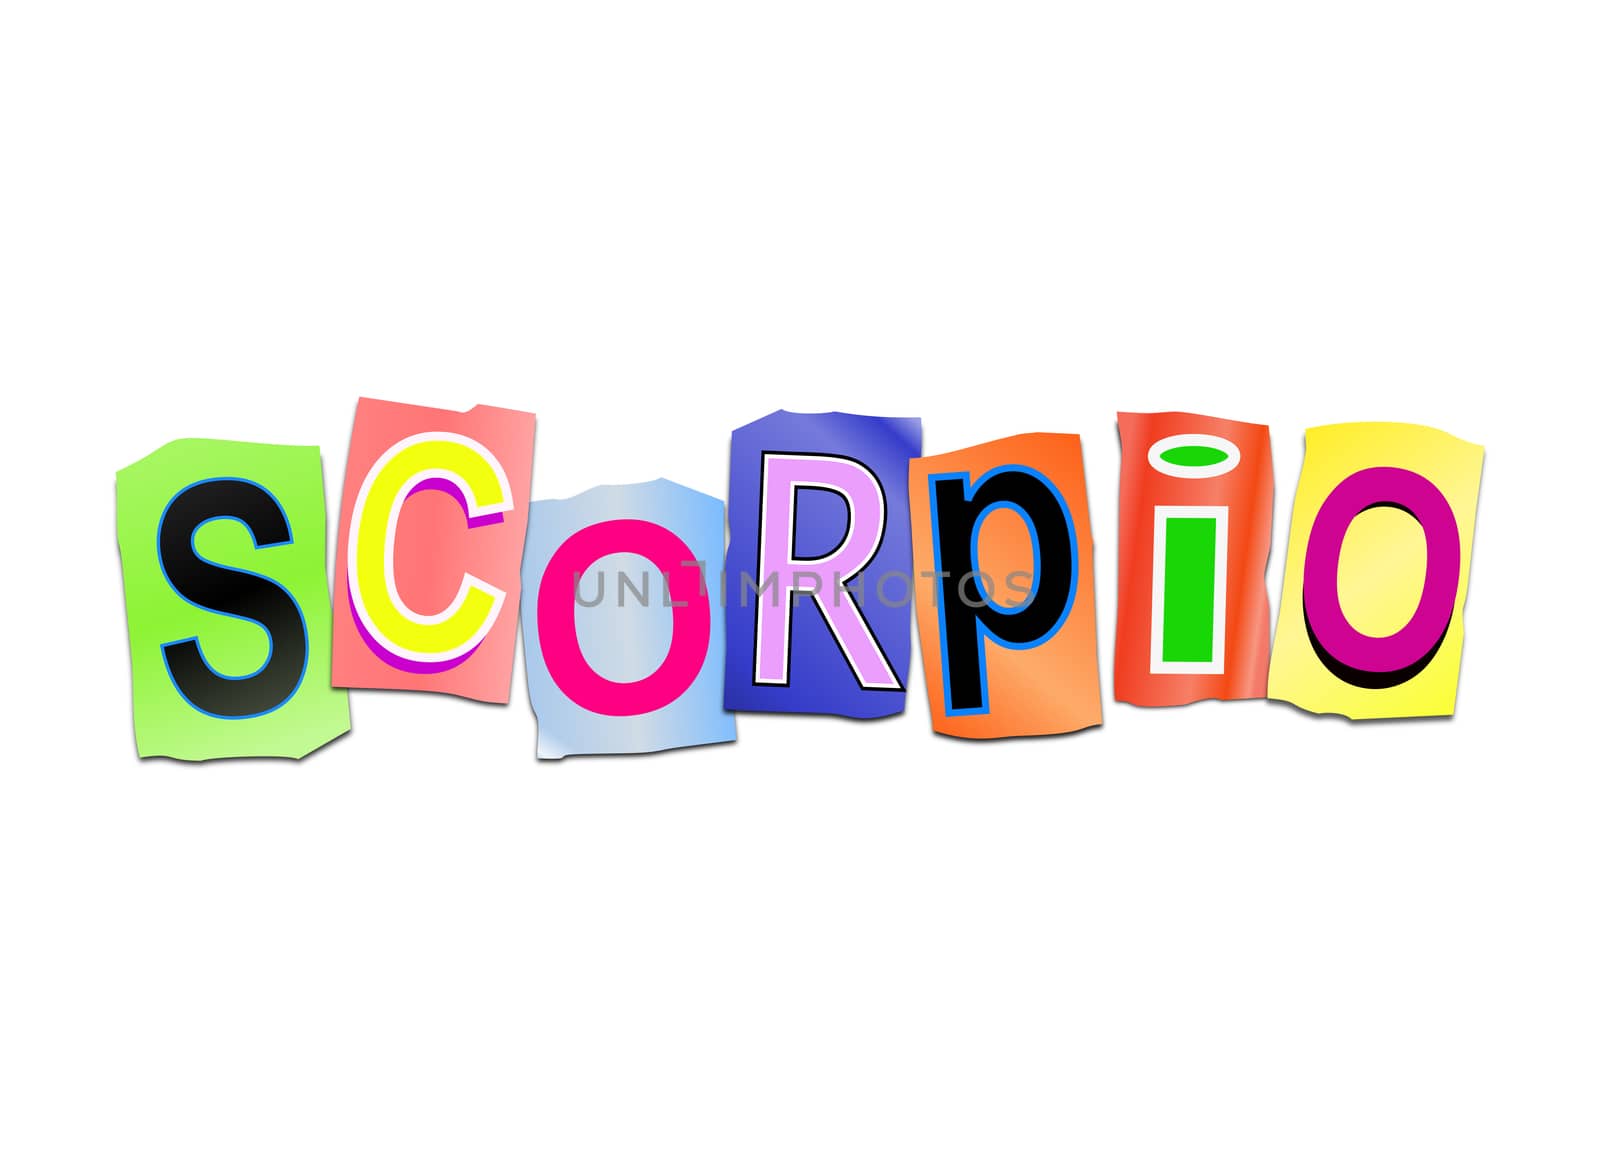 Illustration depicting a set of cut out printed letters arranged to formt the word scorpio.